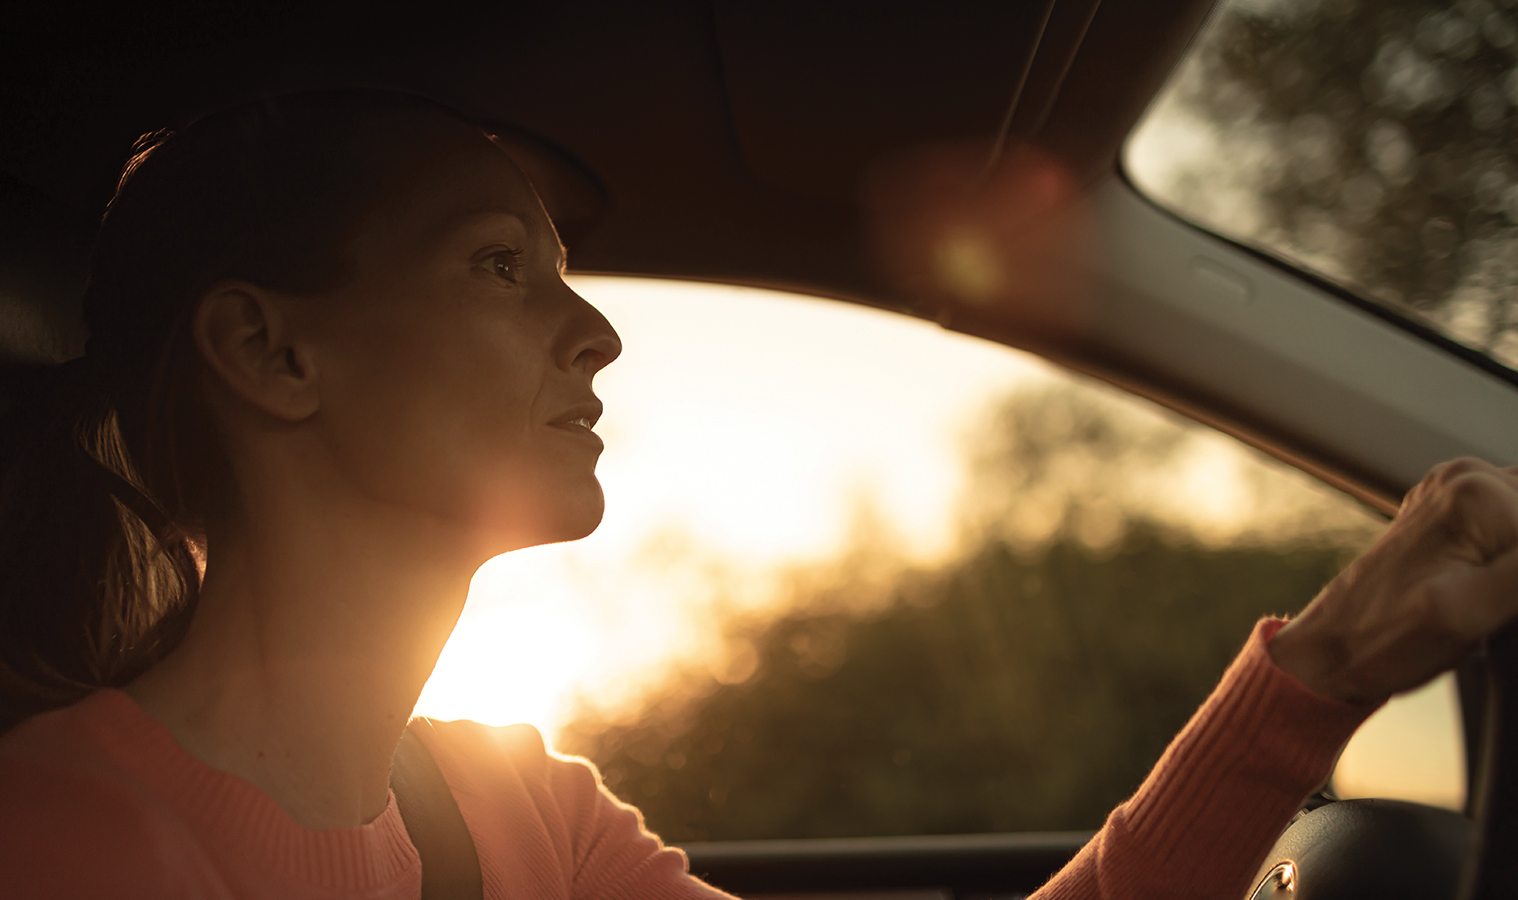 close up on woman's face , focused on driving a car, with sunset glowing behind her shoulder 